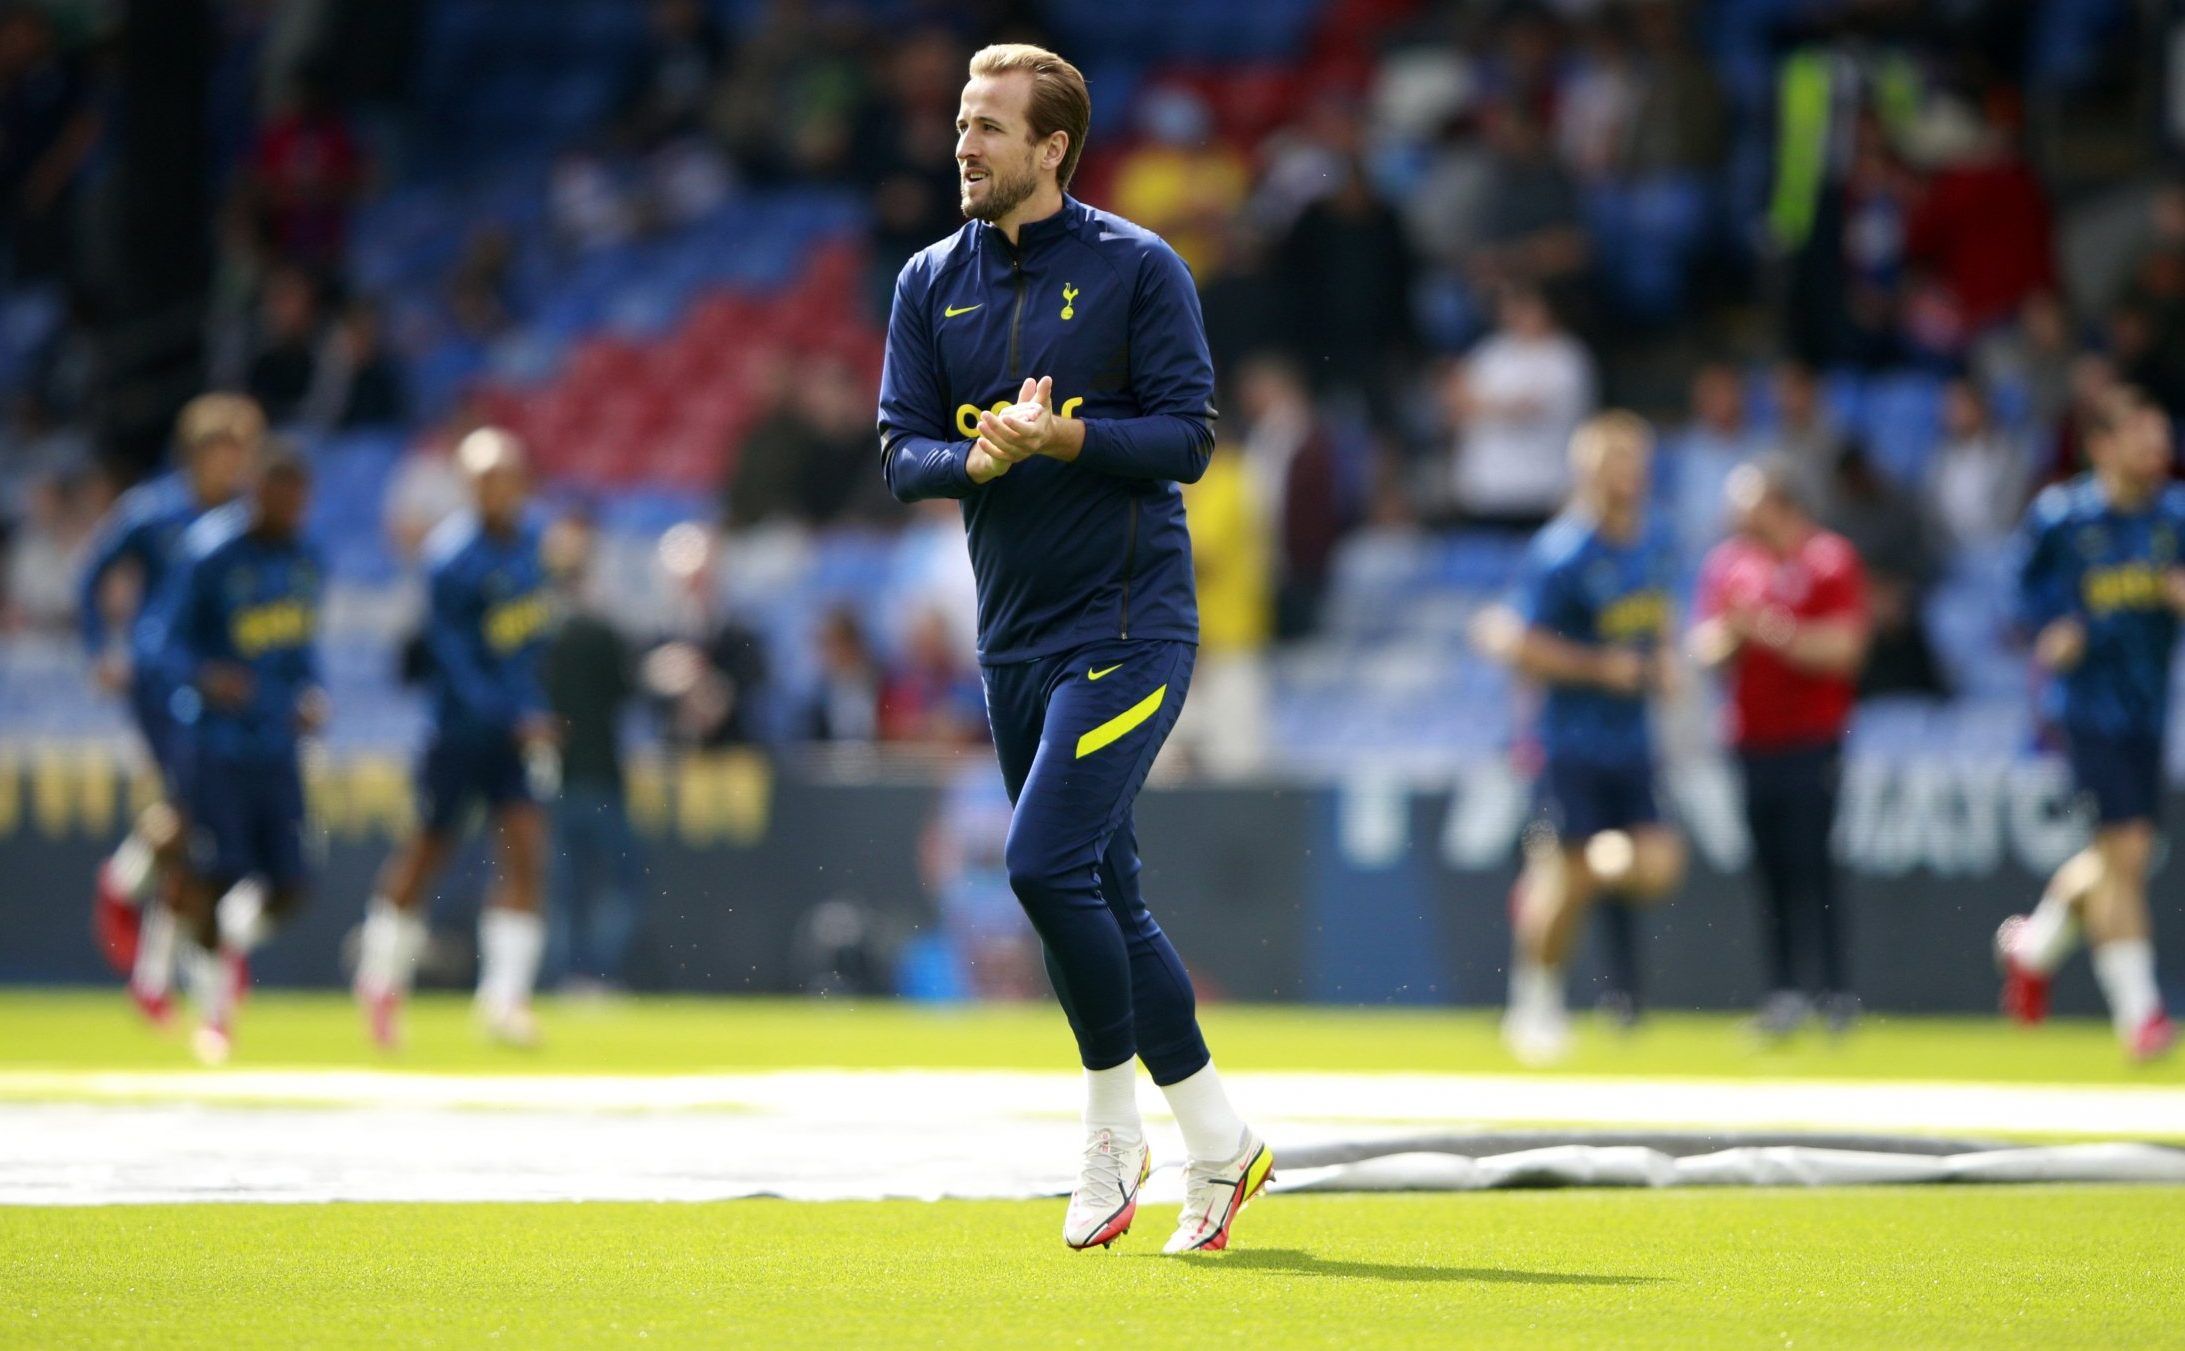 Tottenham Hotspur striker Harry Kane during warm up against Crystal Palace in the Premier League